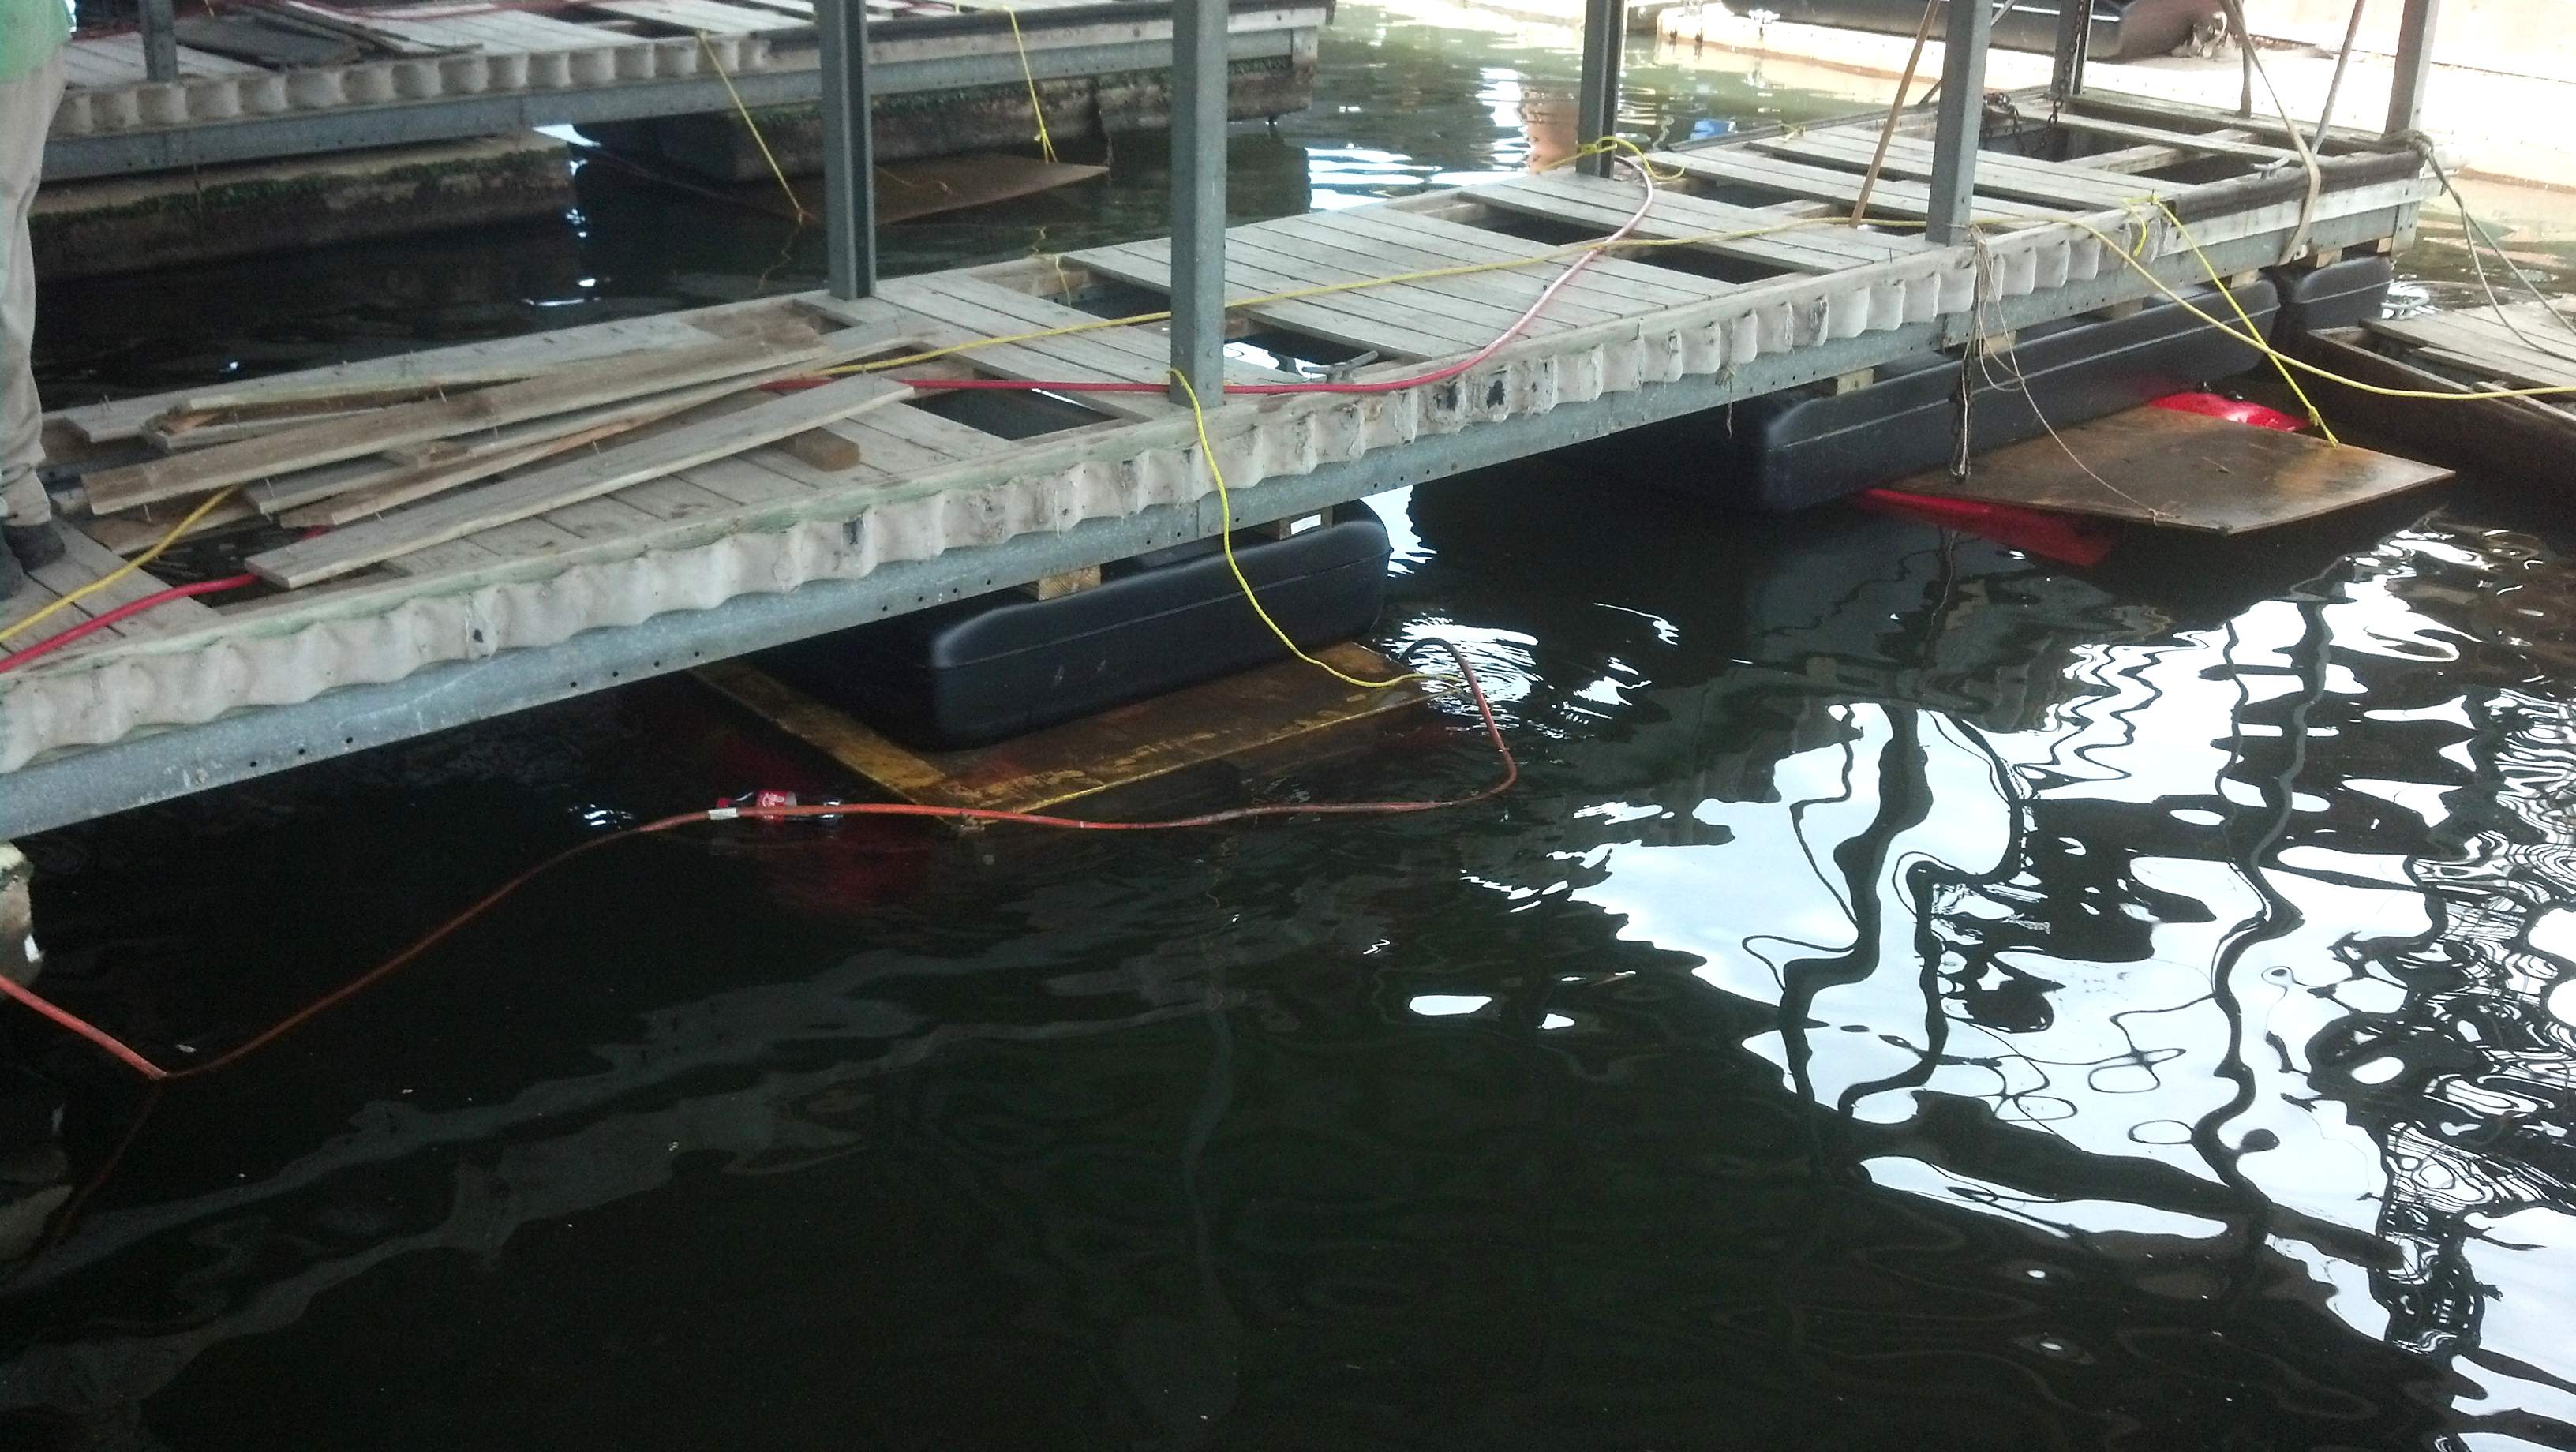 Marian docks lifted with air bags